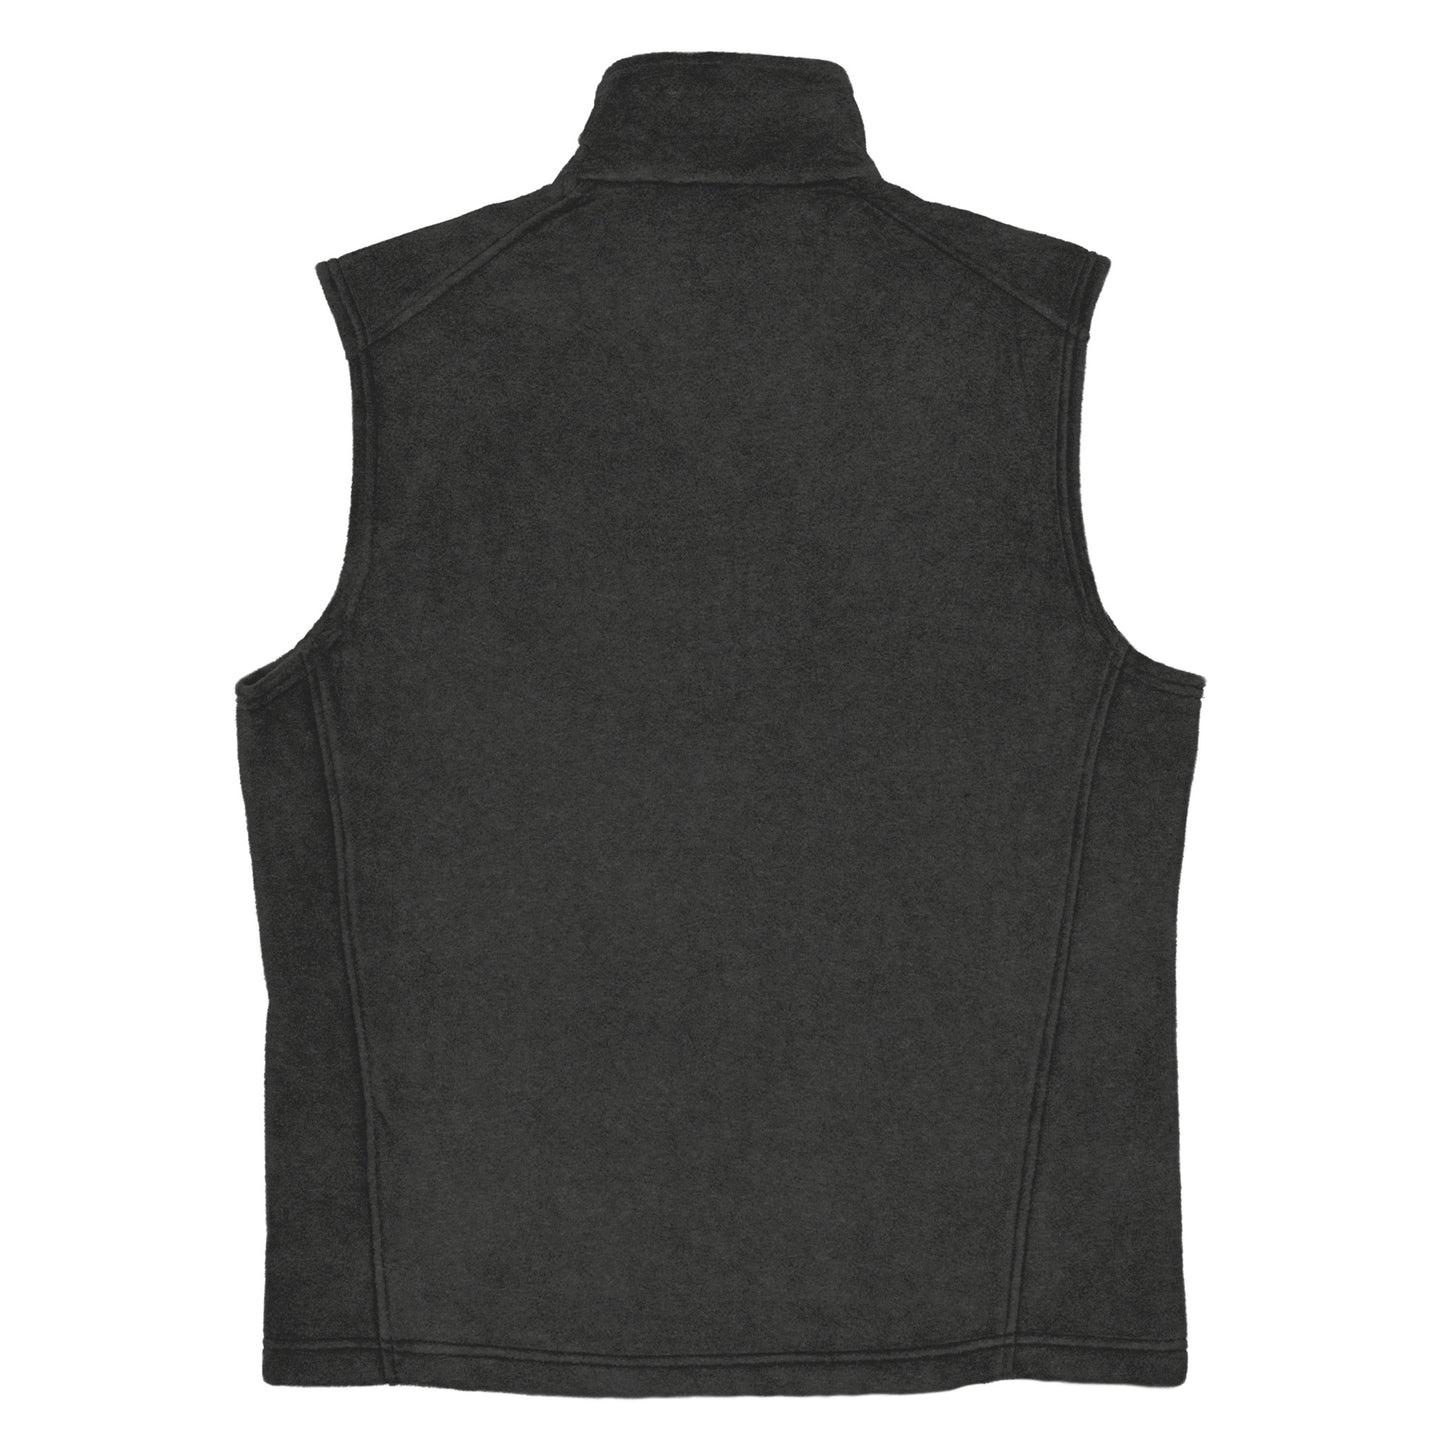 Men's Lazy Bear Outfitters x Columbia Fleece Vest (dark options with white logo)